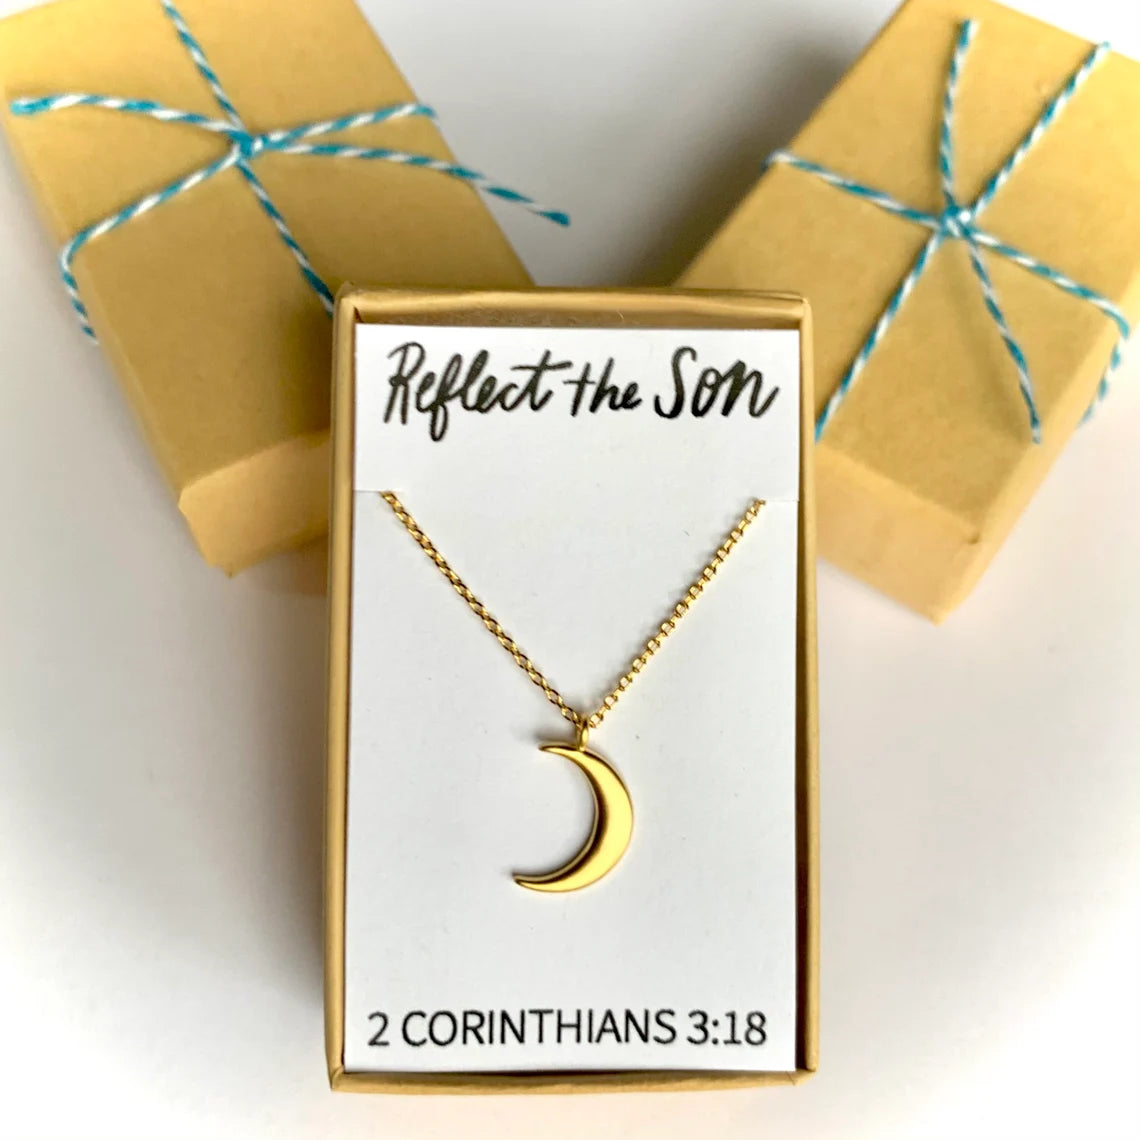 Reflect the Son Necklace